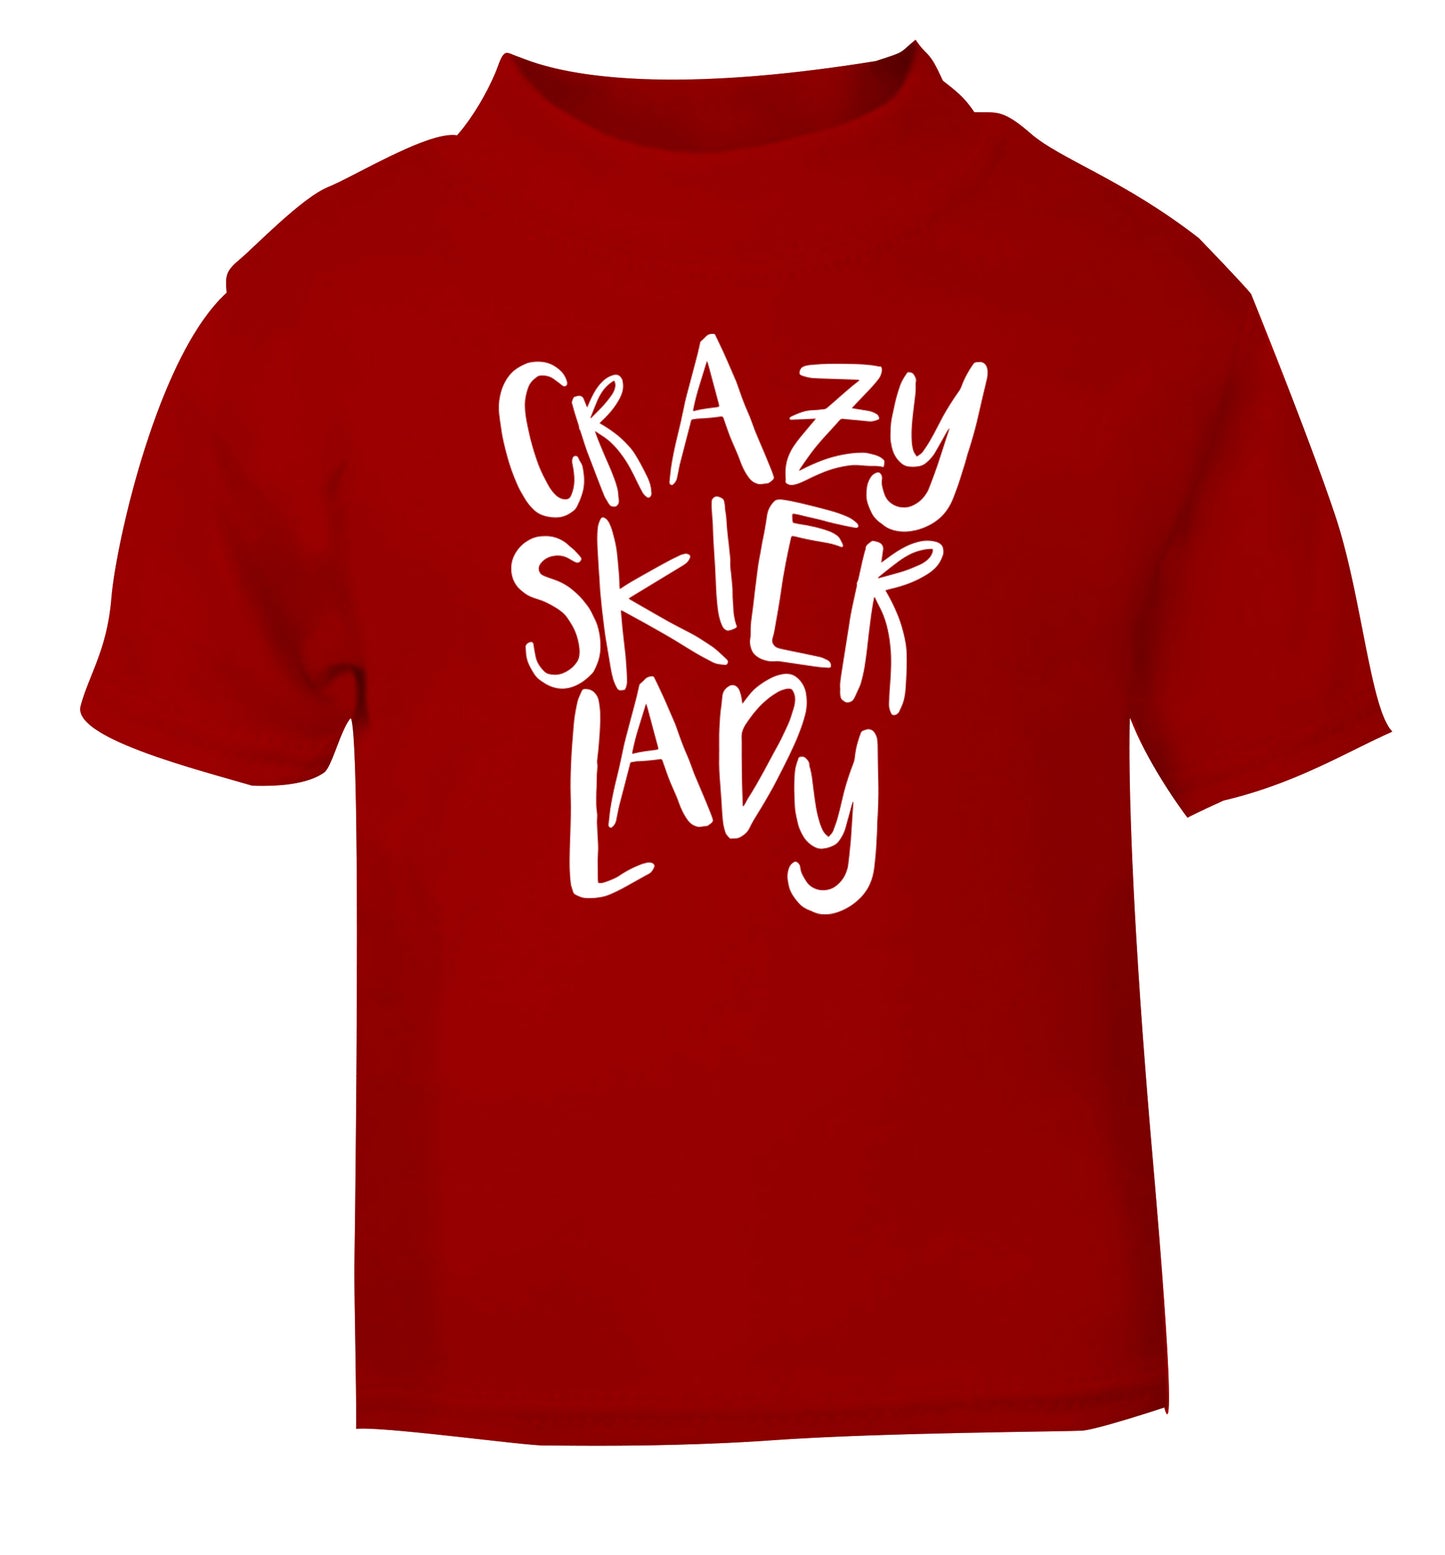 Crazy skier lady red Baby Toddler Tshirt 2 Years